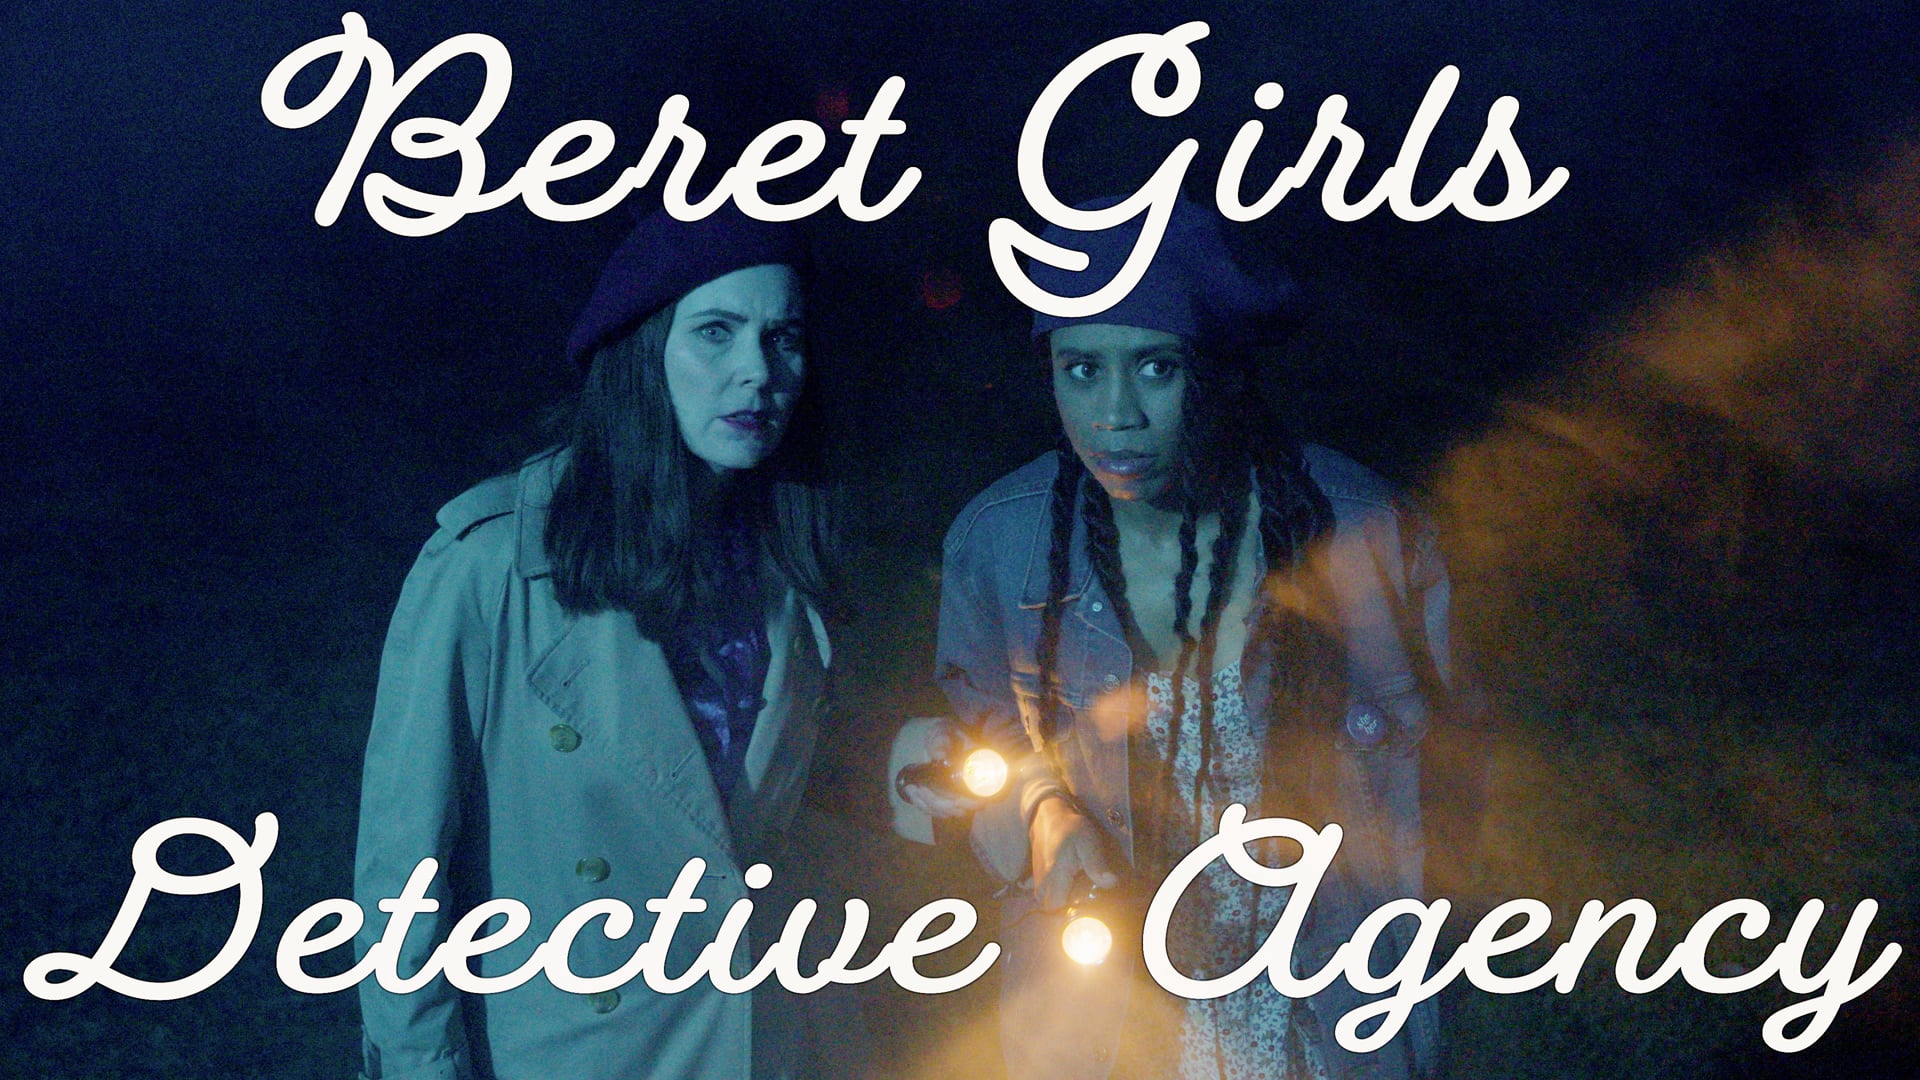 Beret Girls Detective Agency -
Written and Directed by Sallie Keena